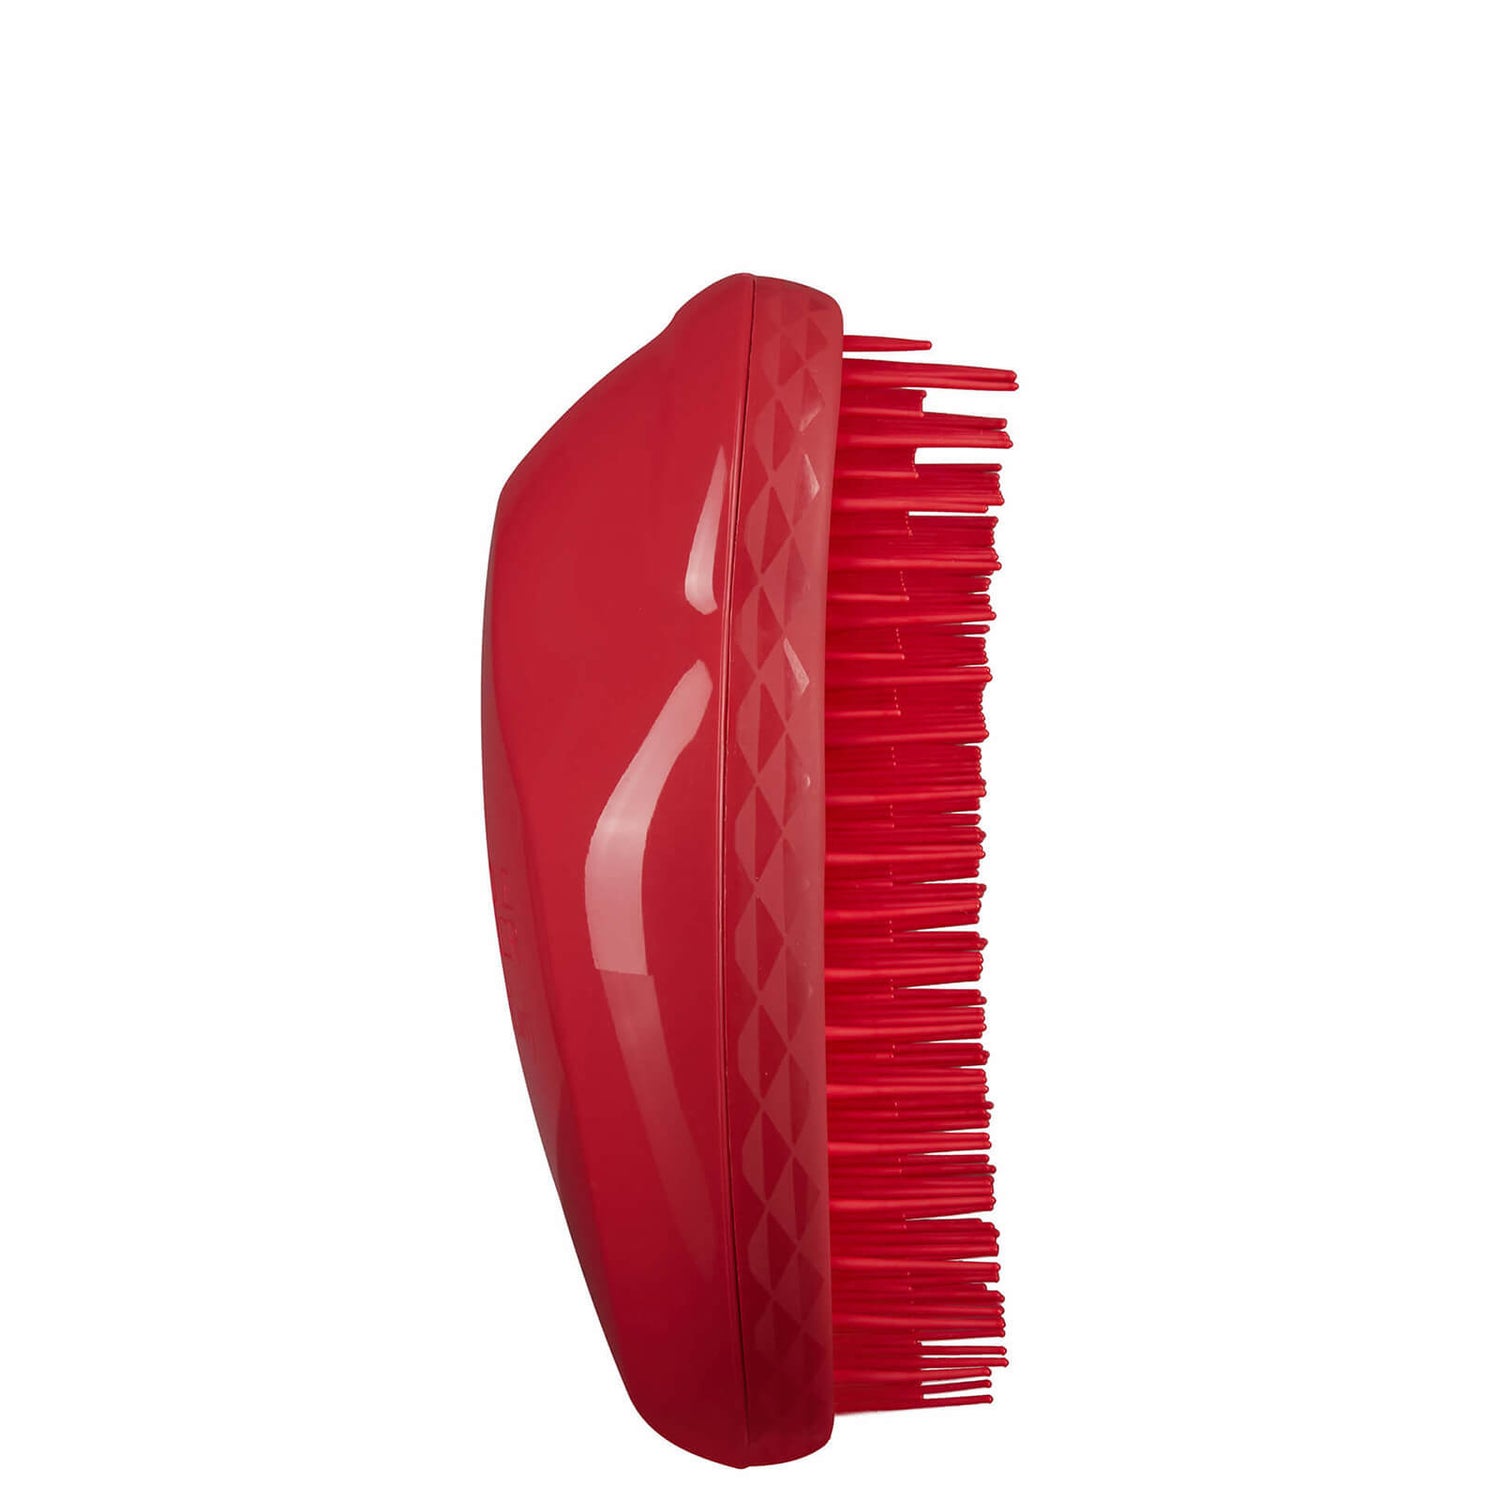 Tangle Teezer Thick and Curly Detangling Hairbrush - Salsa Red